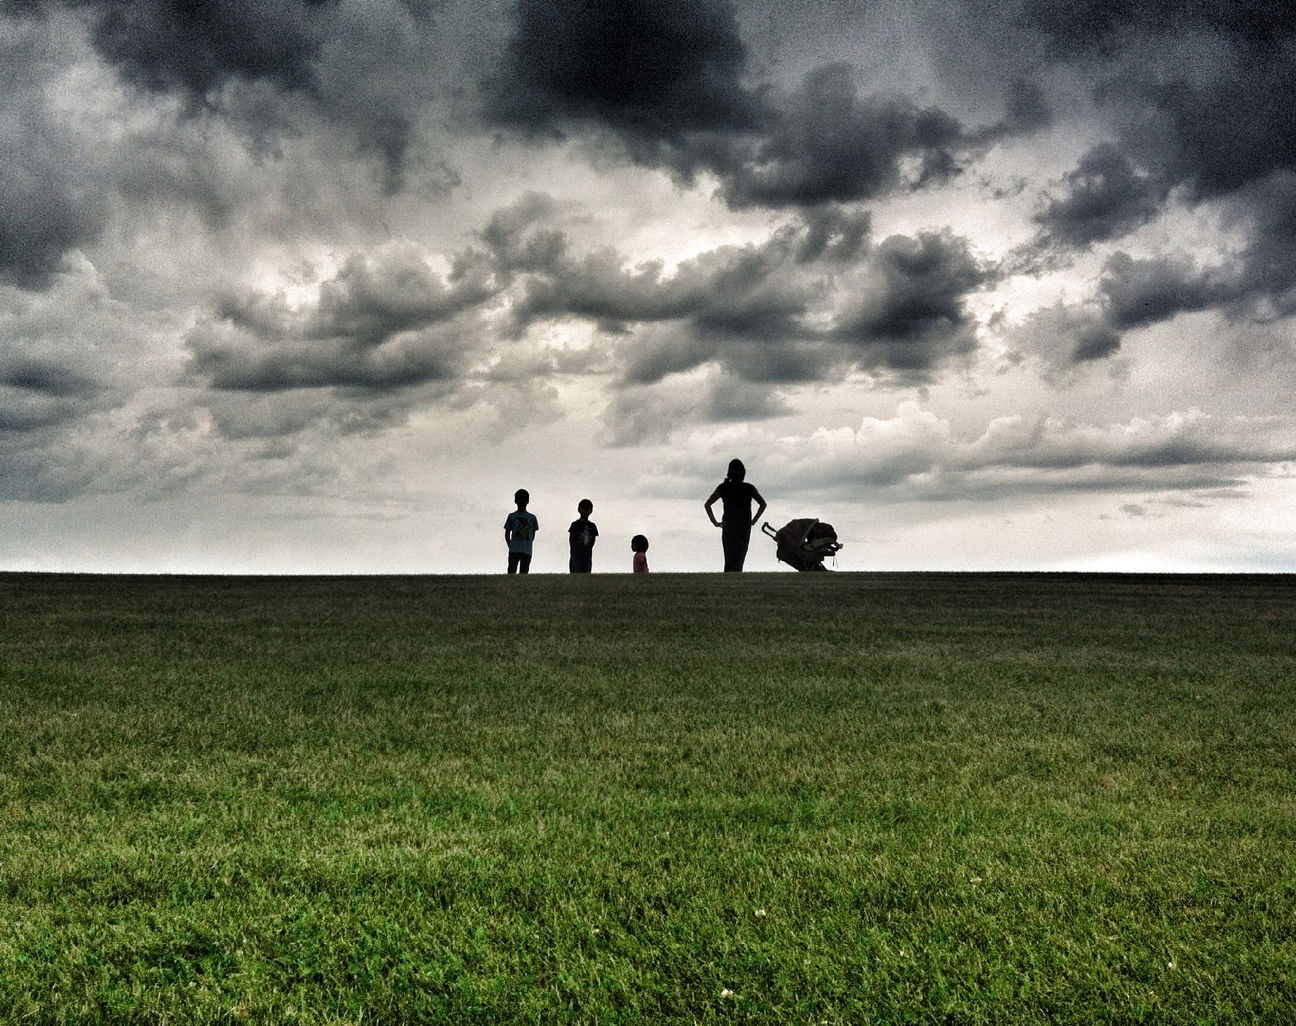 sky, togetherness, men, cloud - sky, leisure activity, lifestyles, grass, bonding, tranquil scene, tranquility, nature, sea, horizon over water, beauty in nature, scenics, cloudy, water, friendship